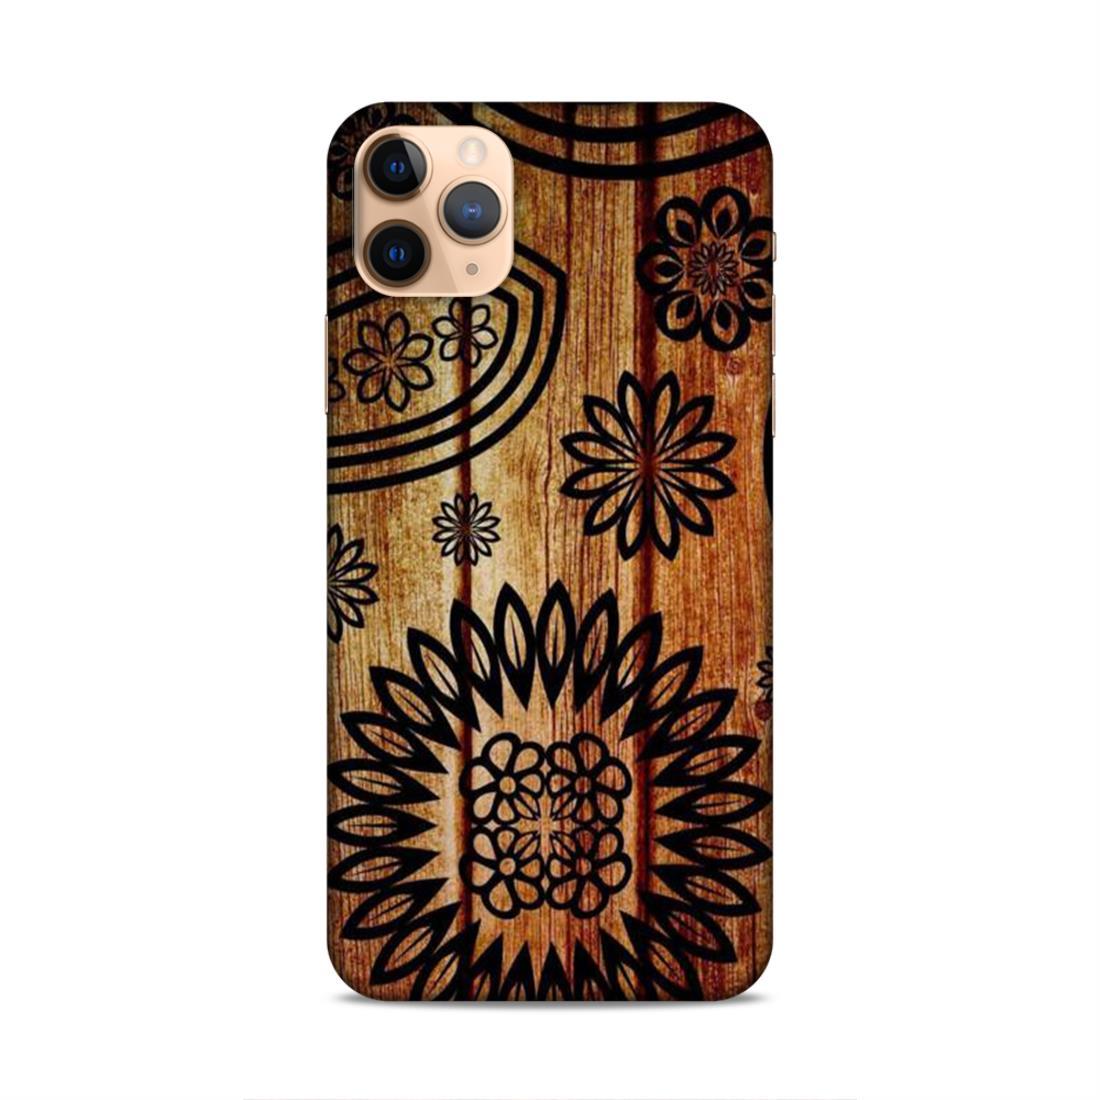 Wooden Look Pattern iPhone 11 Pro Mobile Case Cover